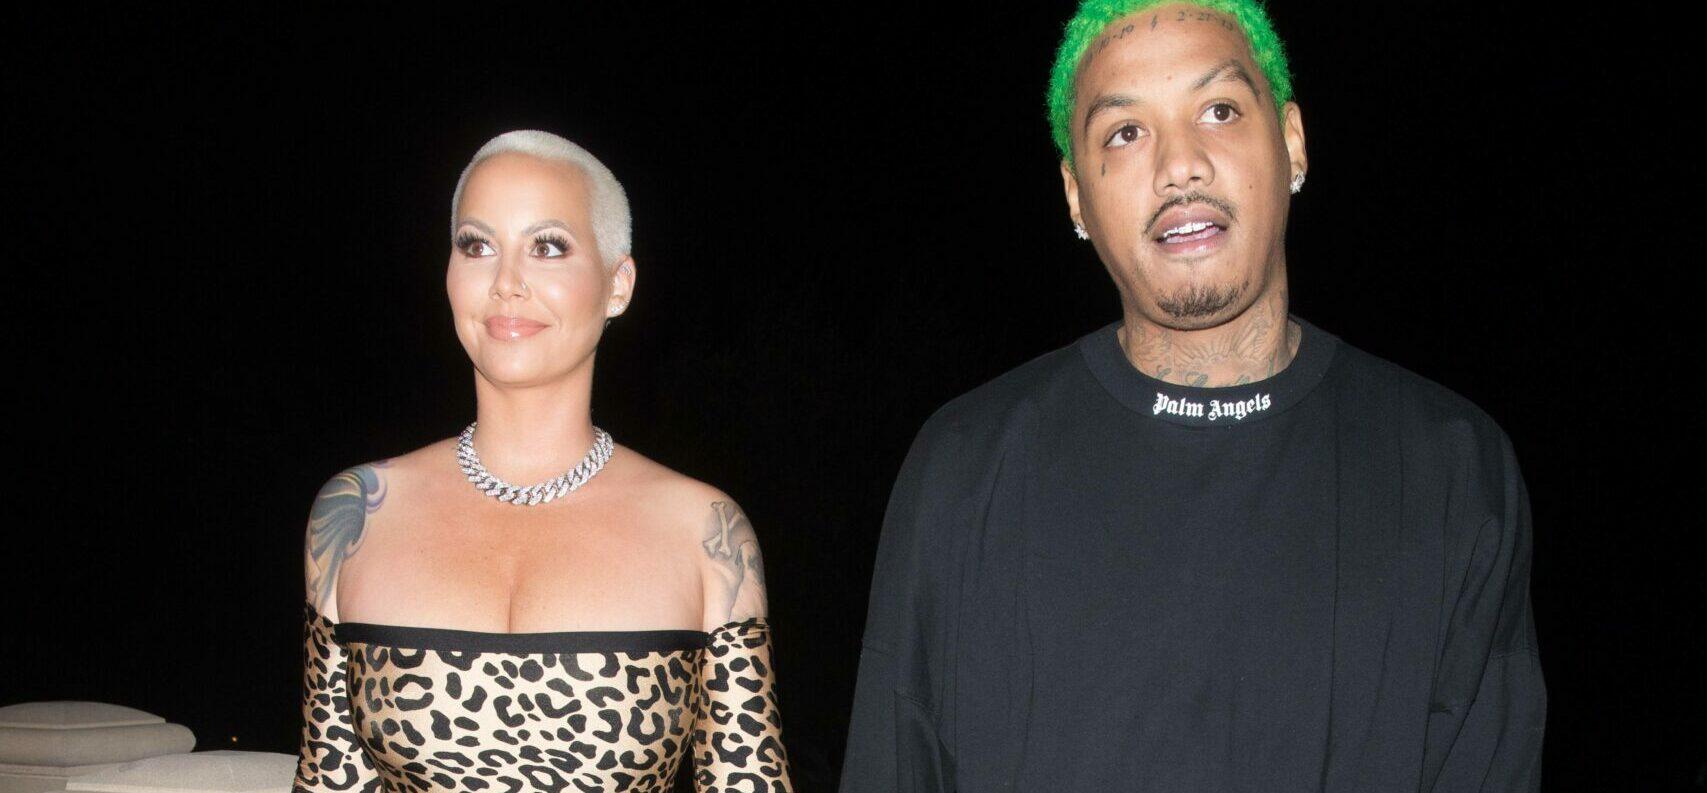 Amber Rose Dumps Boyfriend On Instagram, Accuses Him Of Cheating With 12 Women